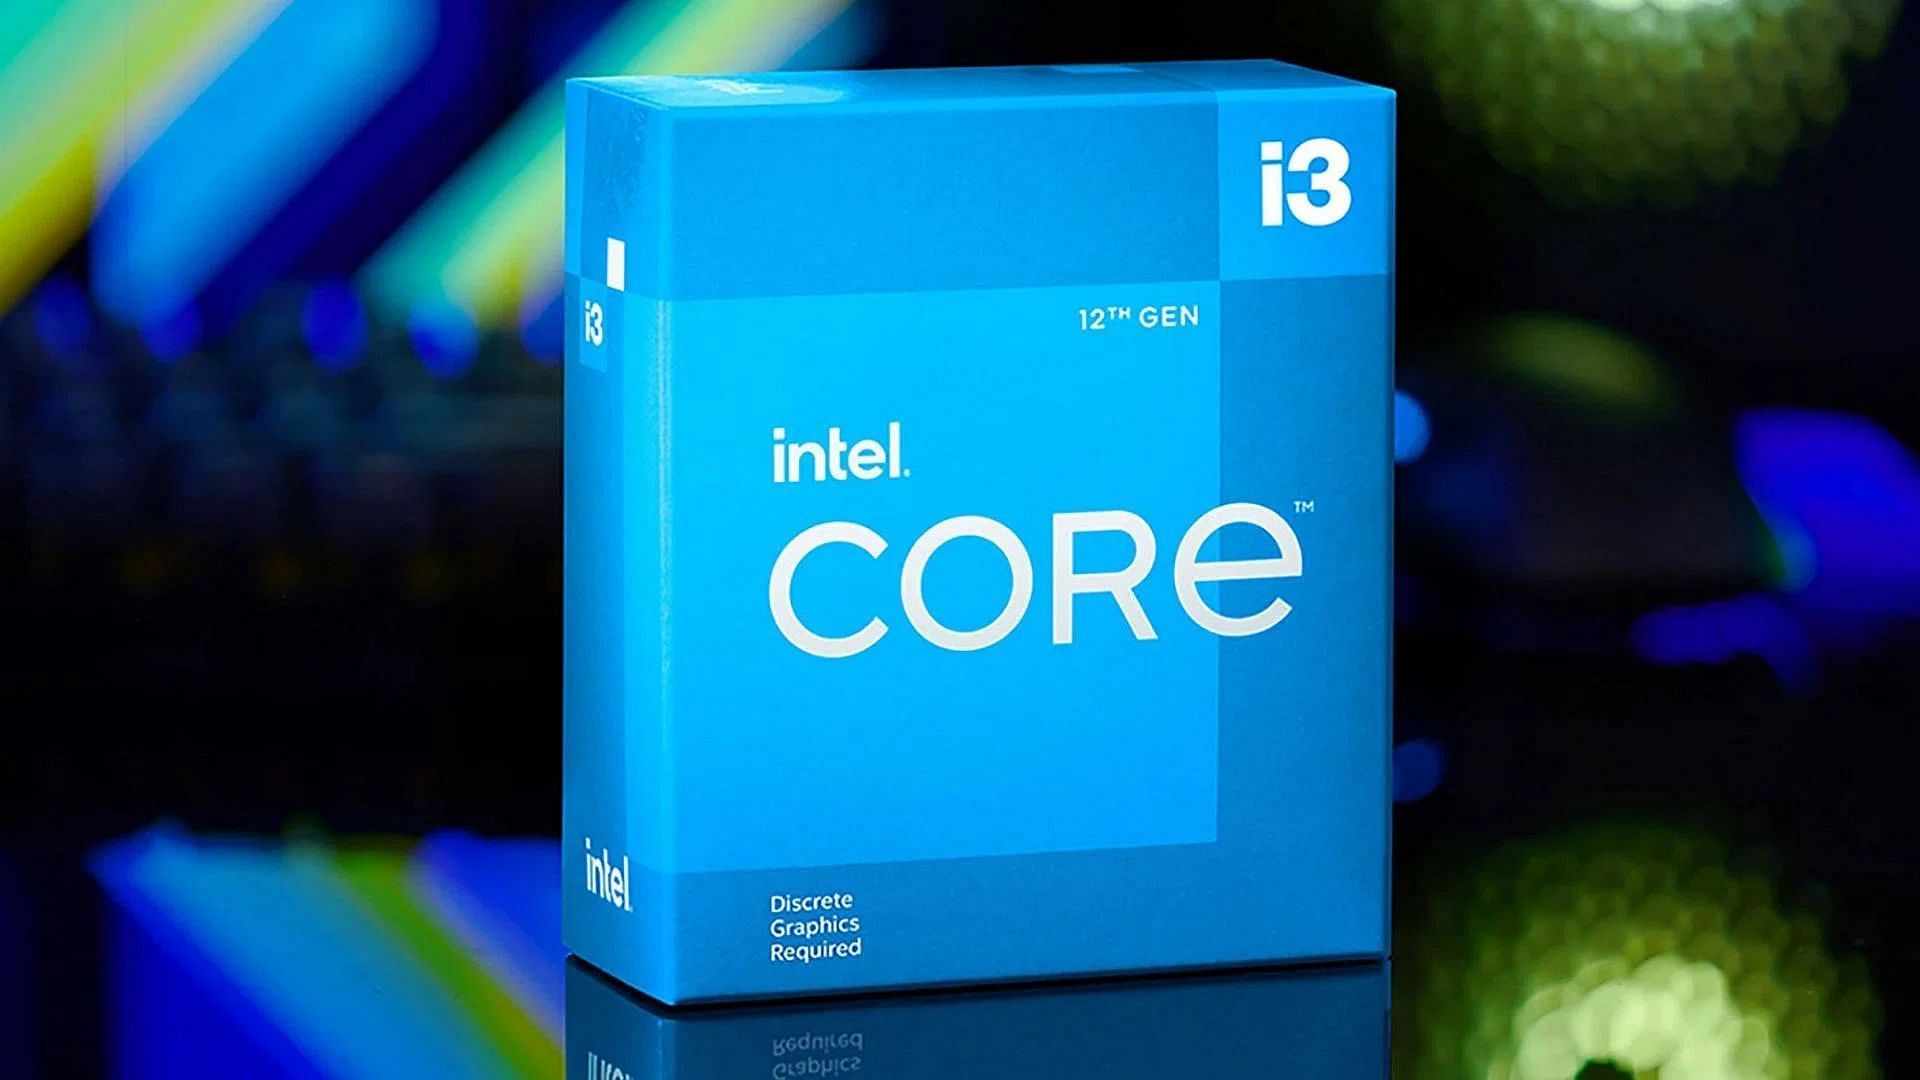 The 12th gen Core i3 is a capable gaming chip on a budget (Image via Amazon)